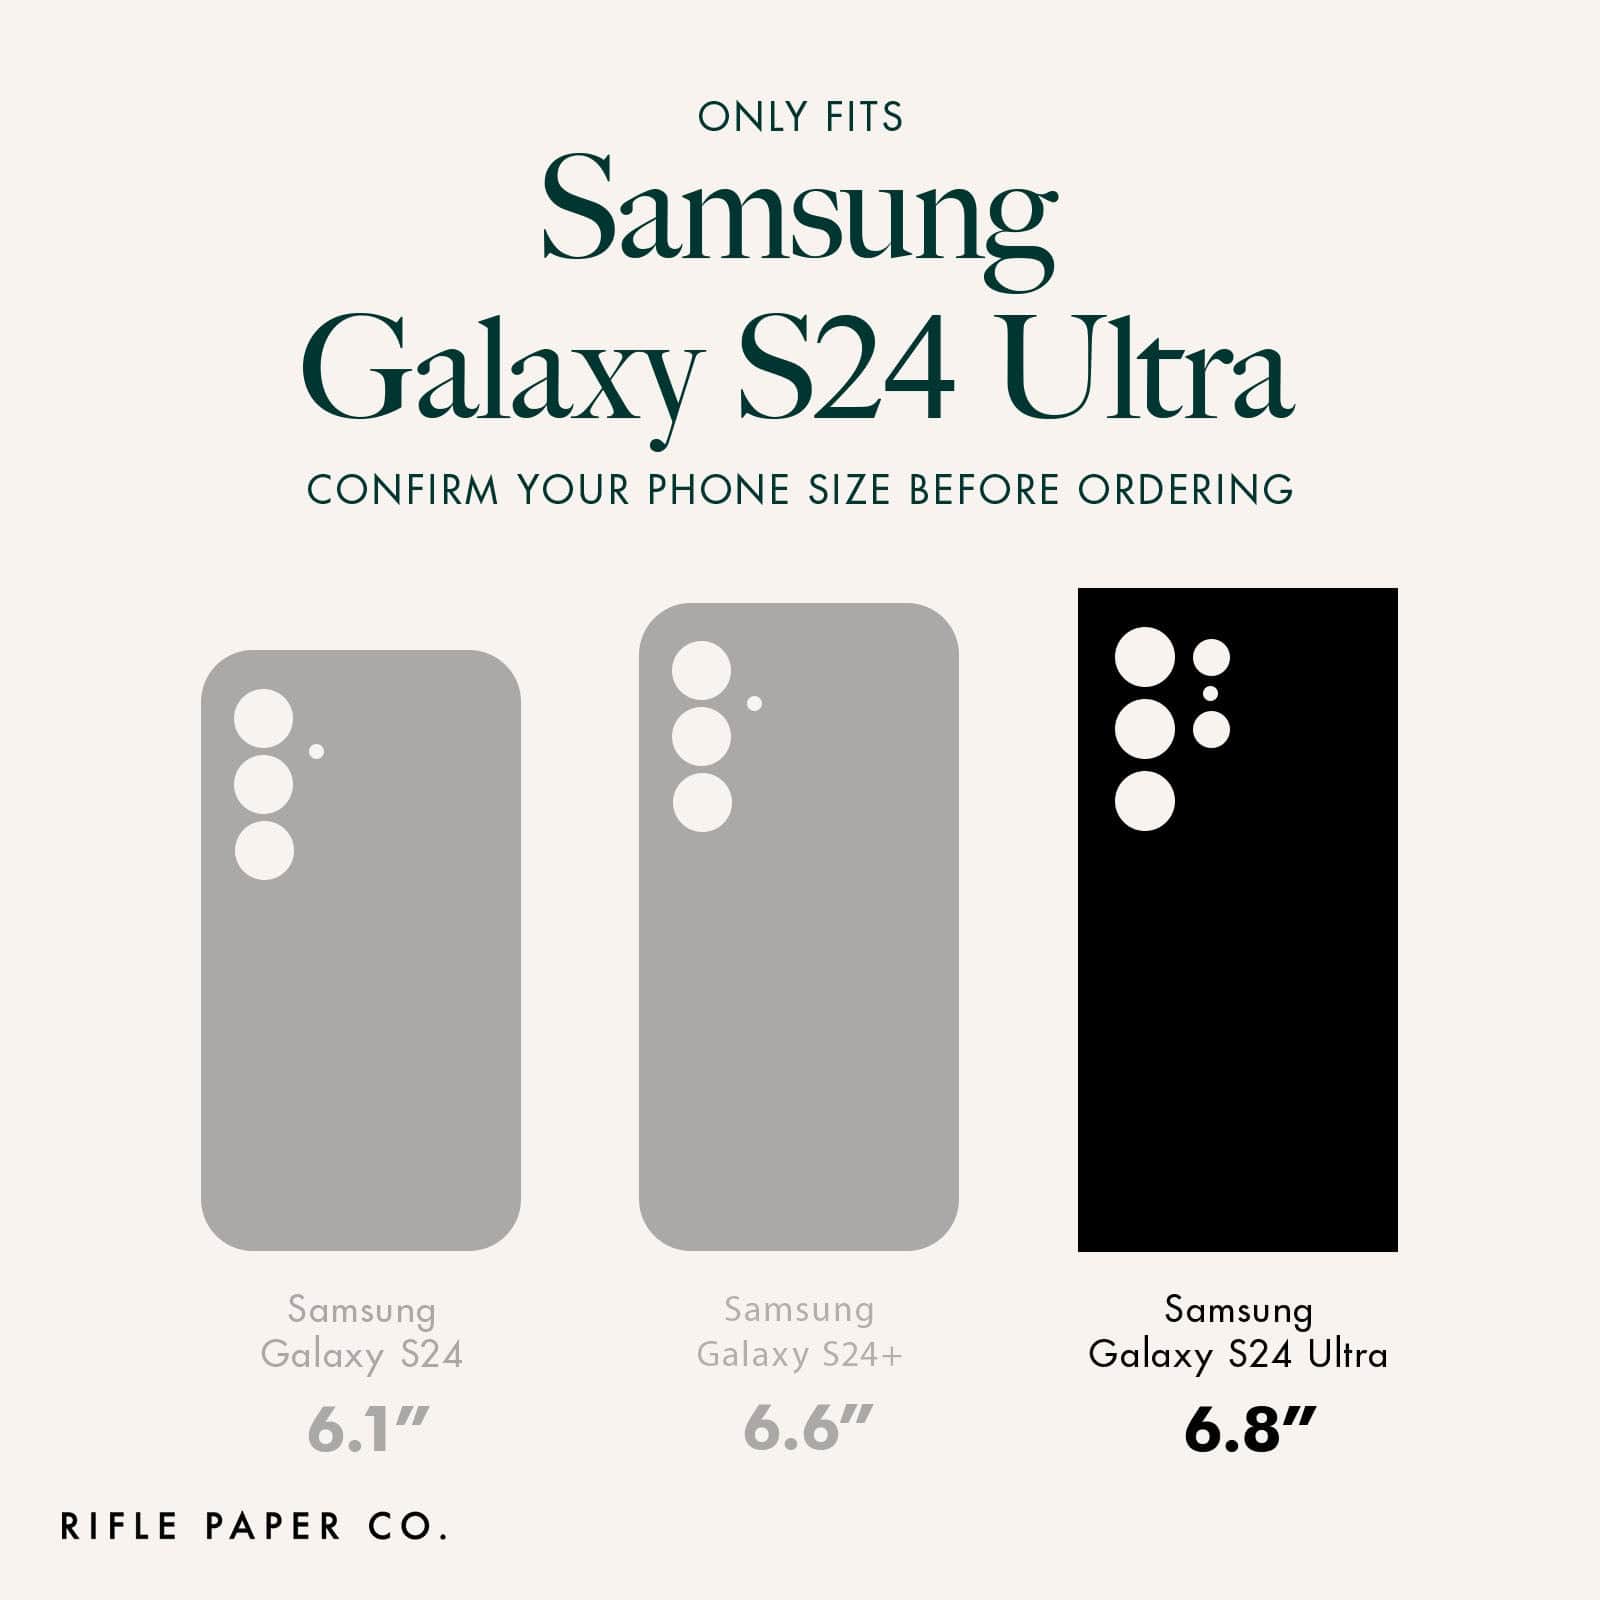 ONLY FITS SAMSUNG GALAXY S24 ULTRA CONFIRM YOUR PHONE SIZE BEFORE ORDERING